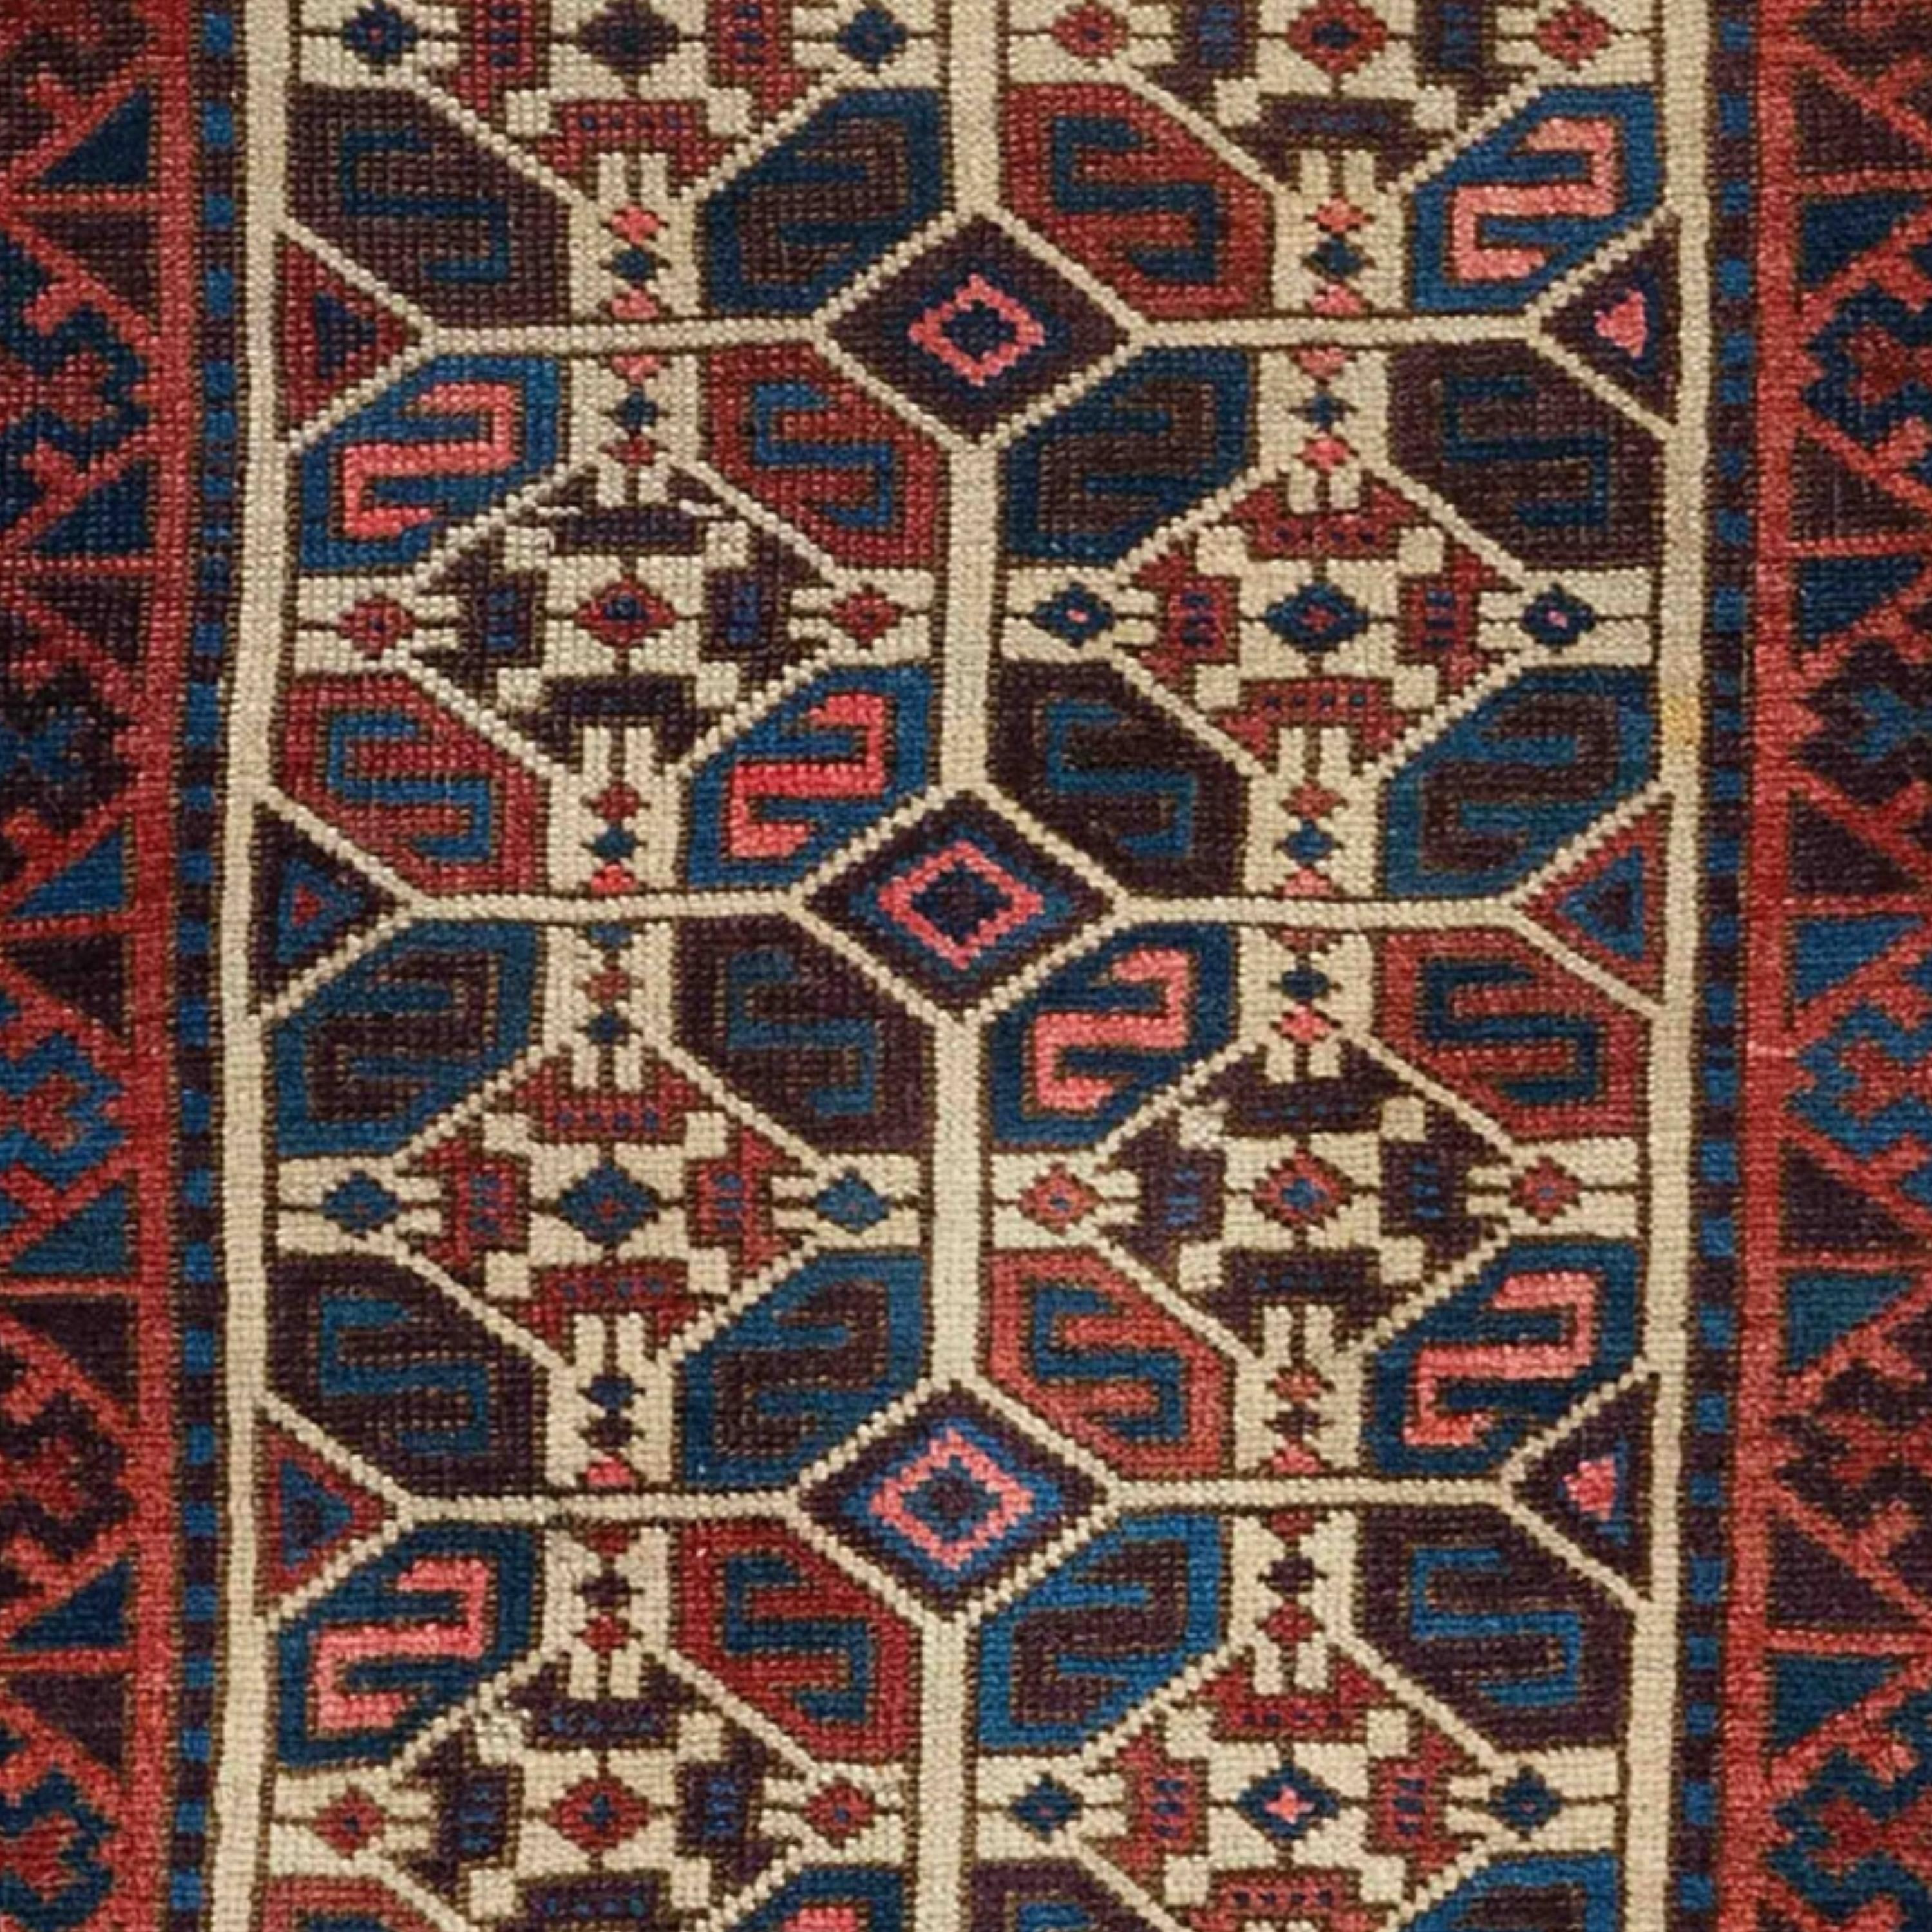 Central Asian Antique Baluch Rug - Middle of 19th Century Baluch Rug, Antique Rug For Sale